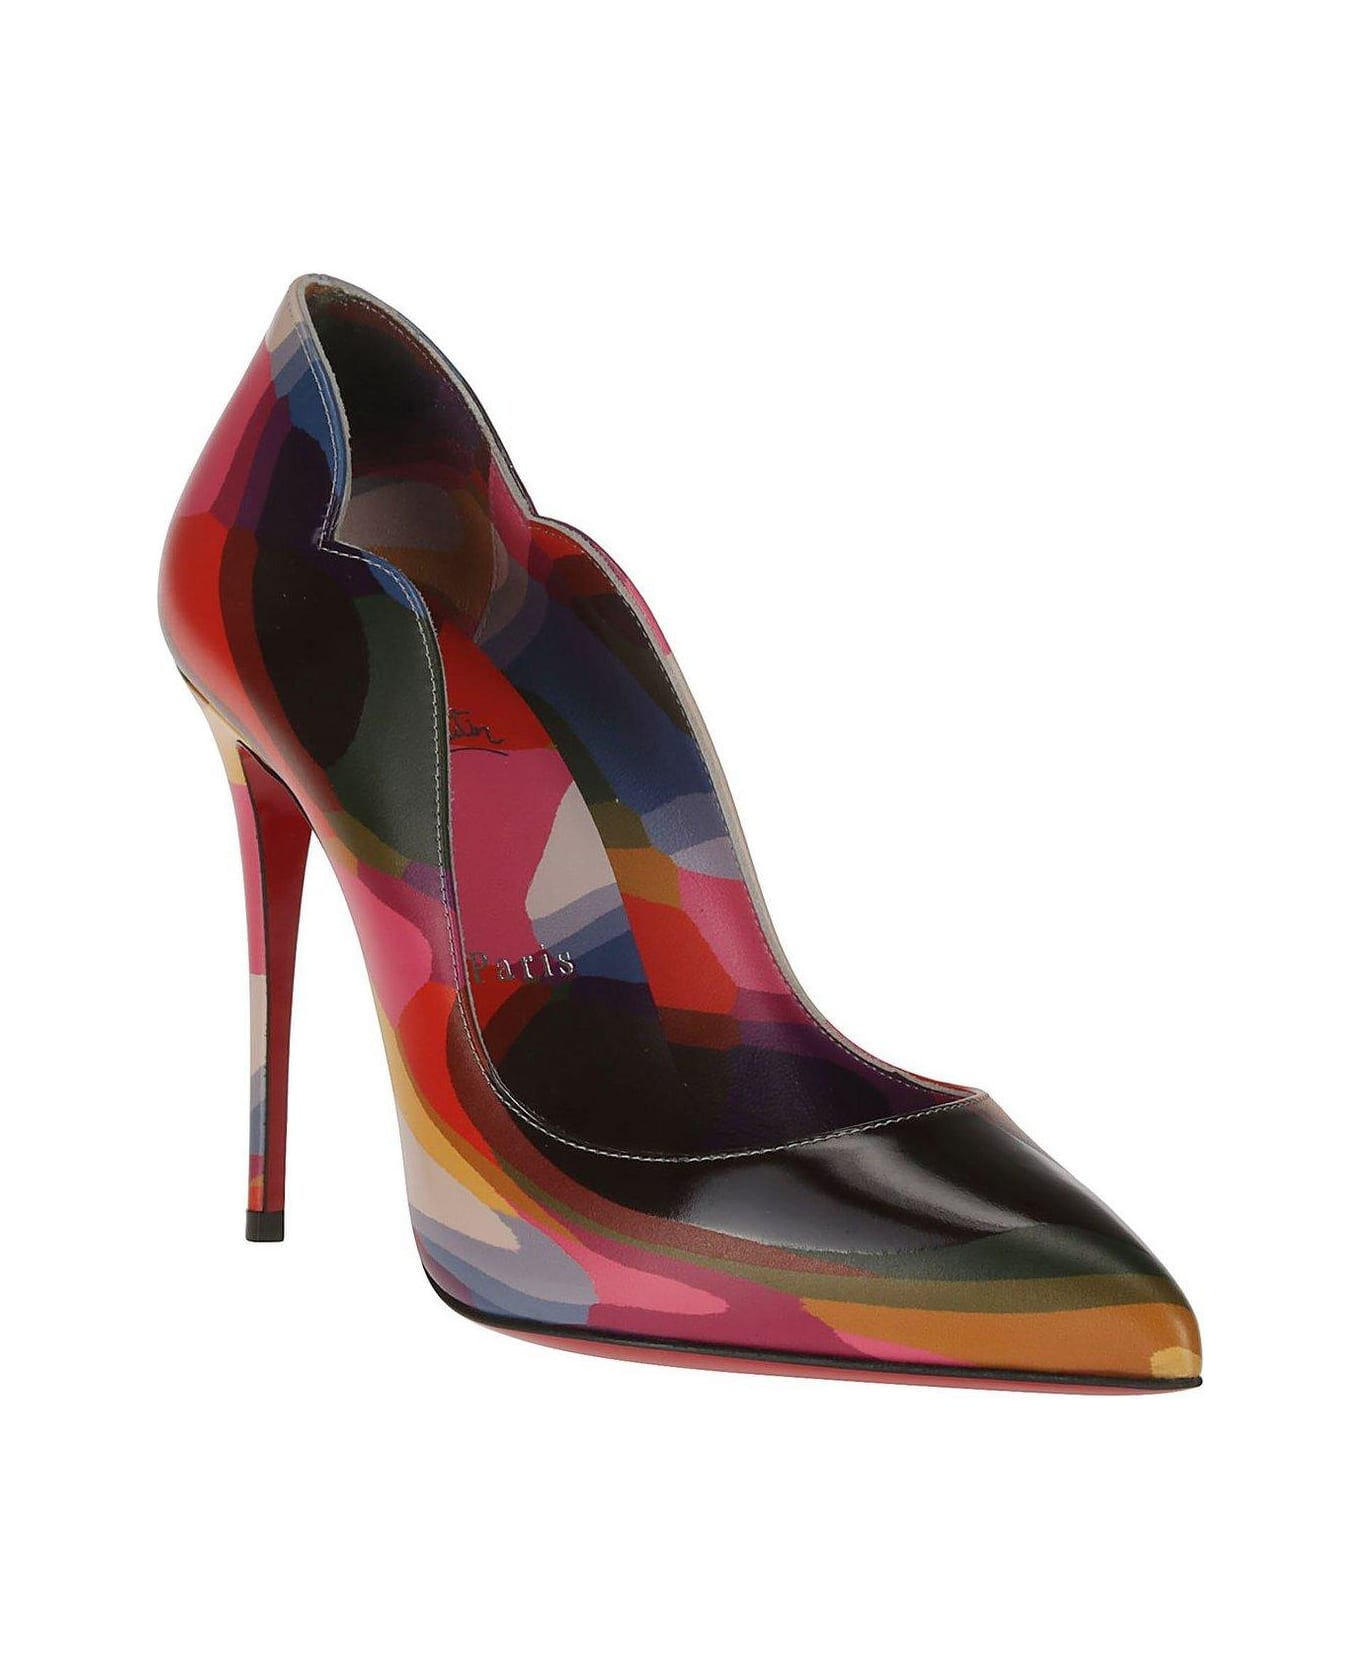 Christian Louboutin Hot Chick Pumps - MULTICOLOR ハイヒール